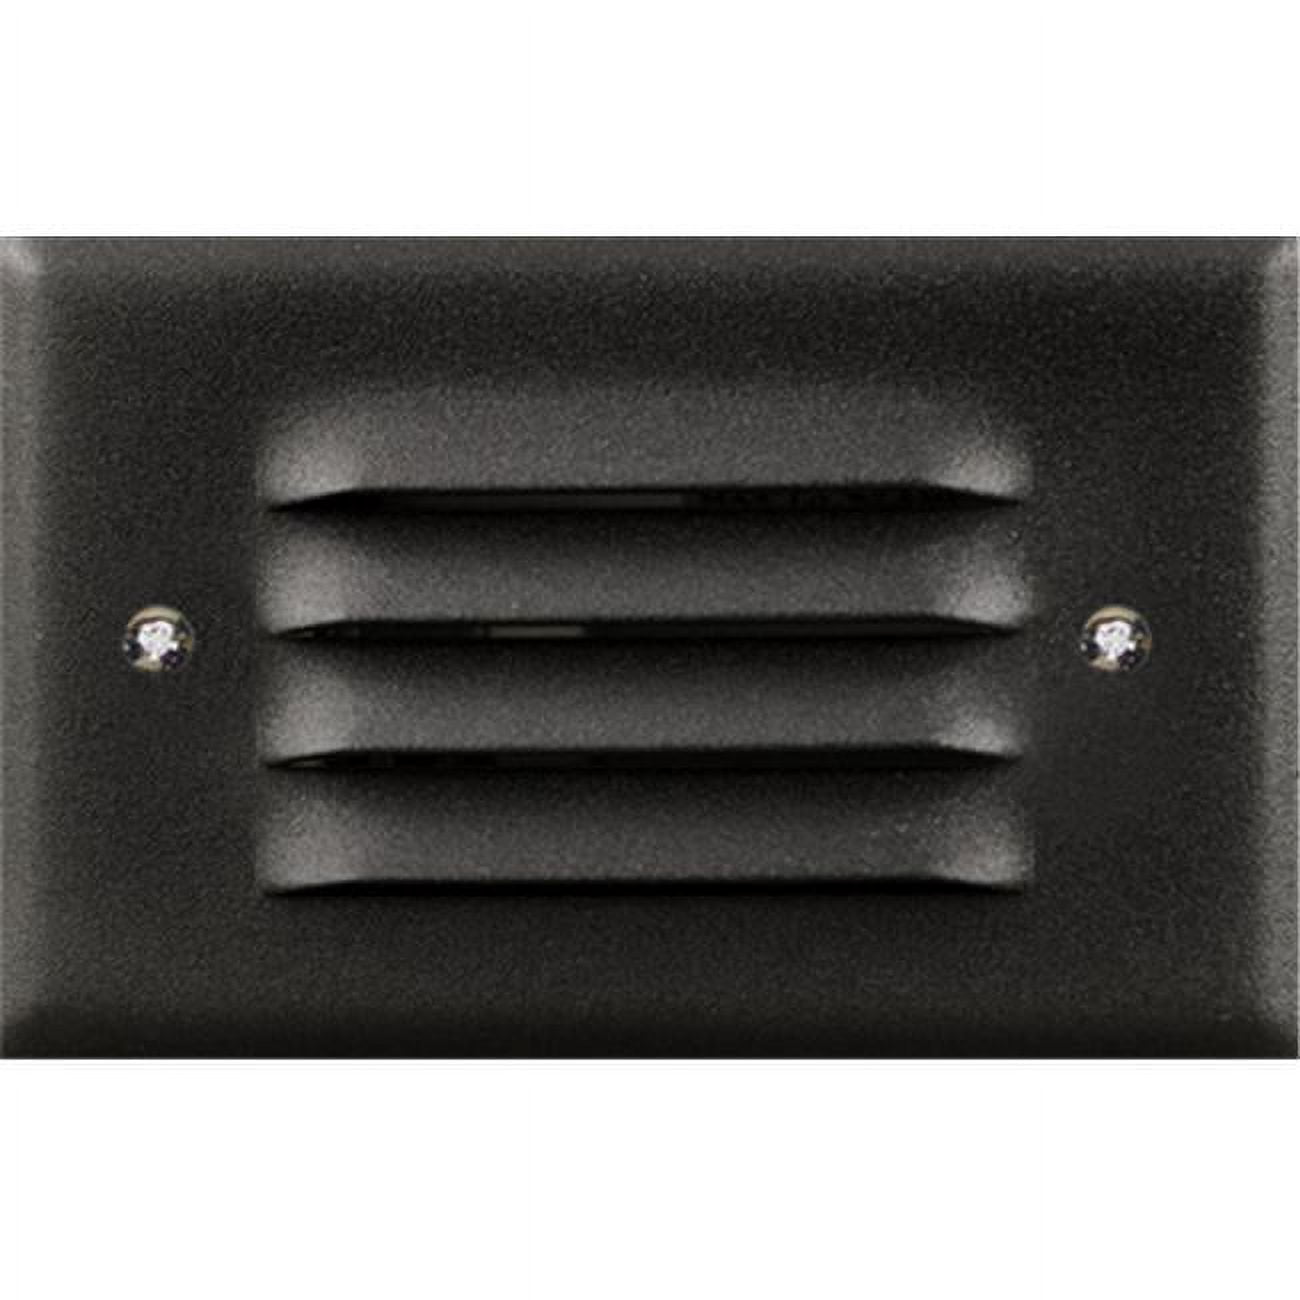 Picture of Dabmar Lighting LV617-B Cast Aluminum Recessed Louvered Brick, Step & Wall Light, Black - 1.95 x 4.83 x 3.10 in.